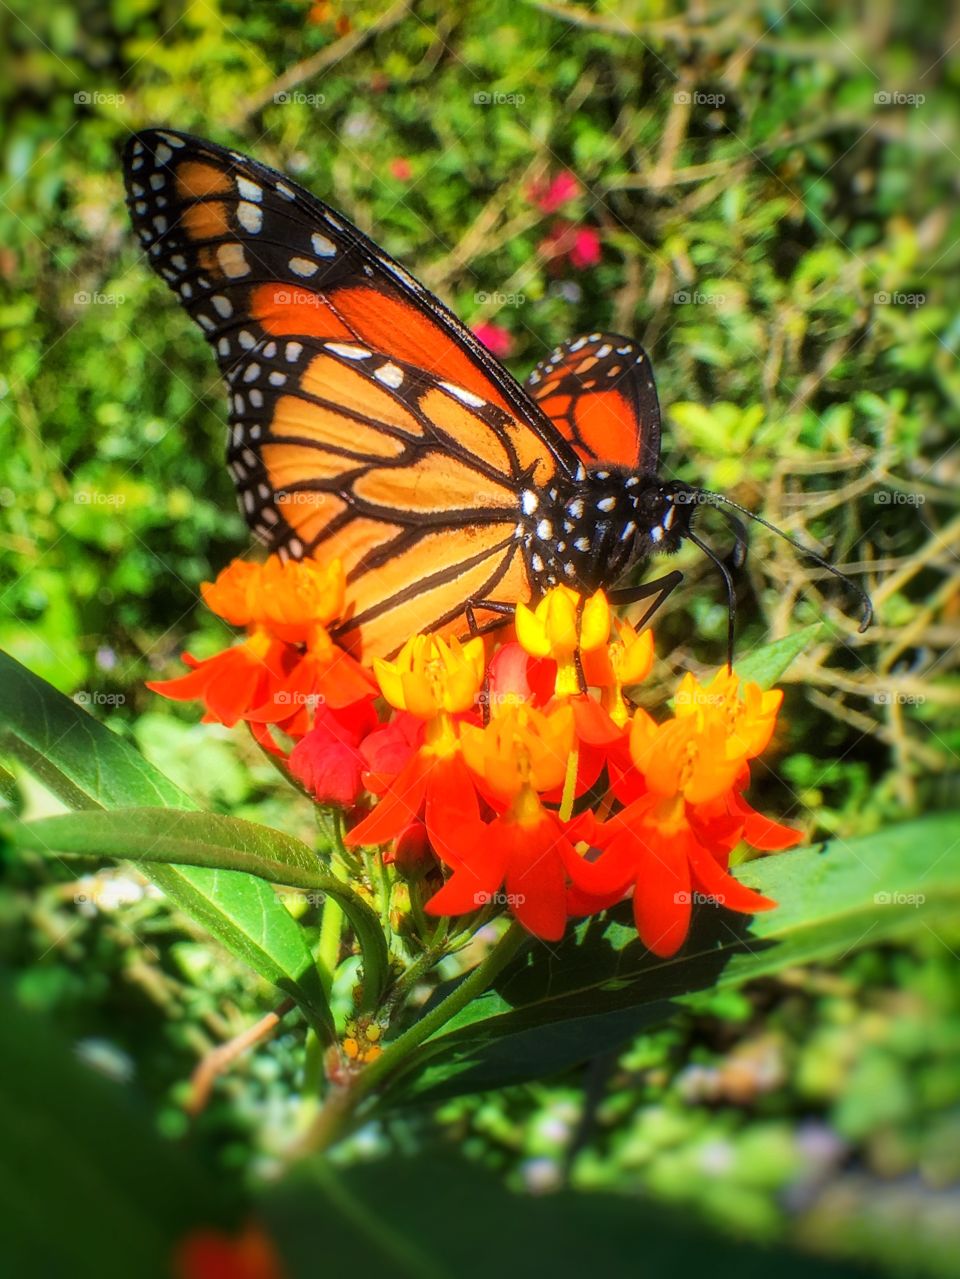 Monarch butterfly pollinating on flower